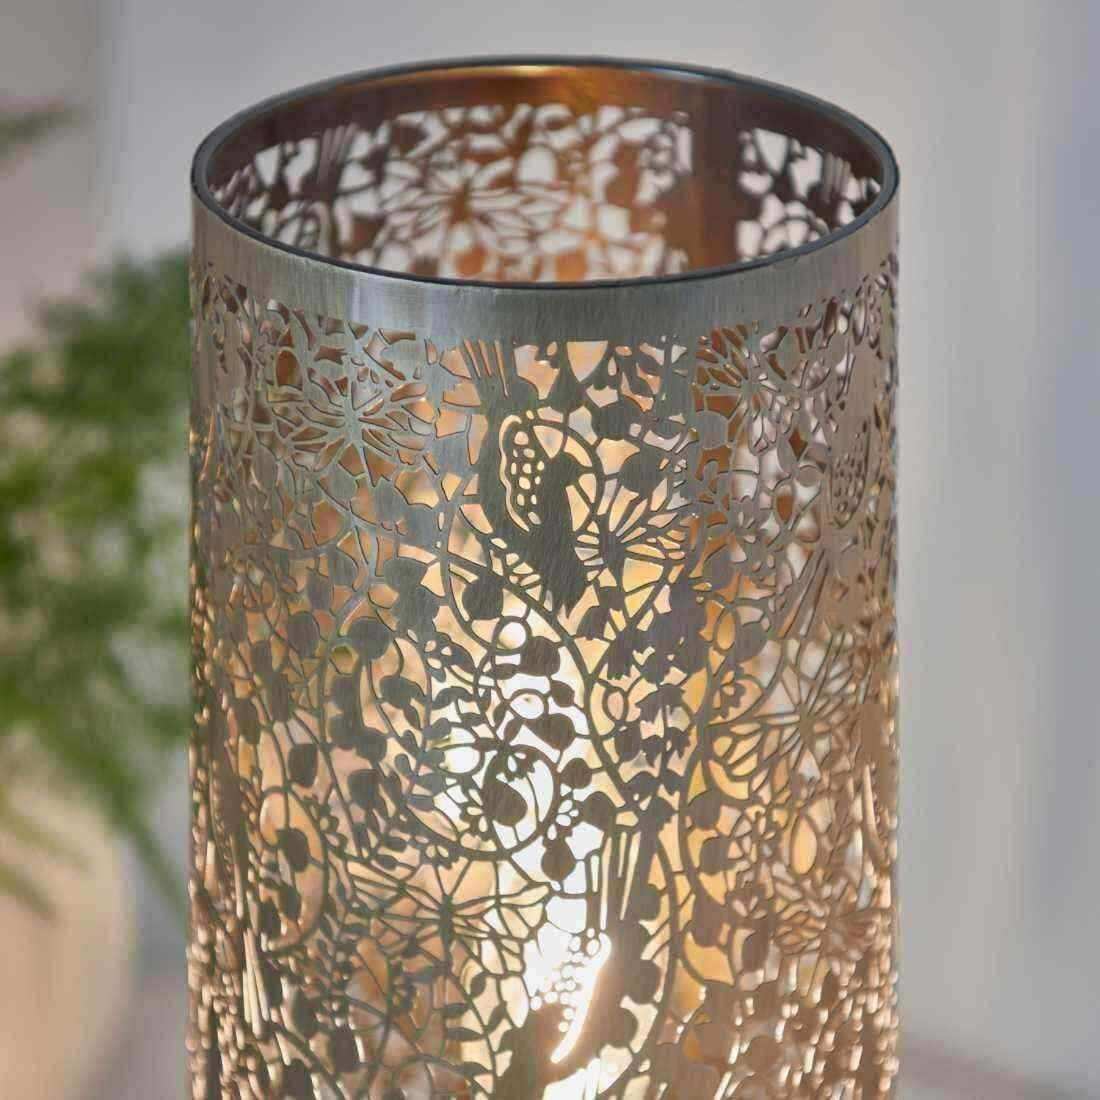 Antique Brass Cutout Filigree Patterned Table Light - The Farthing